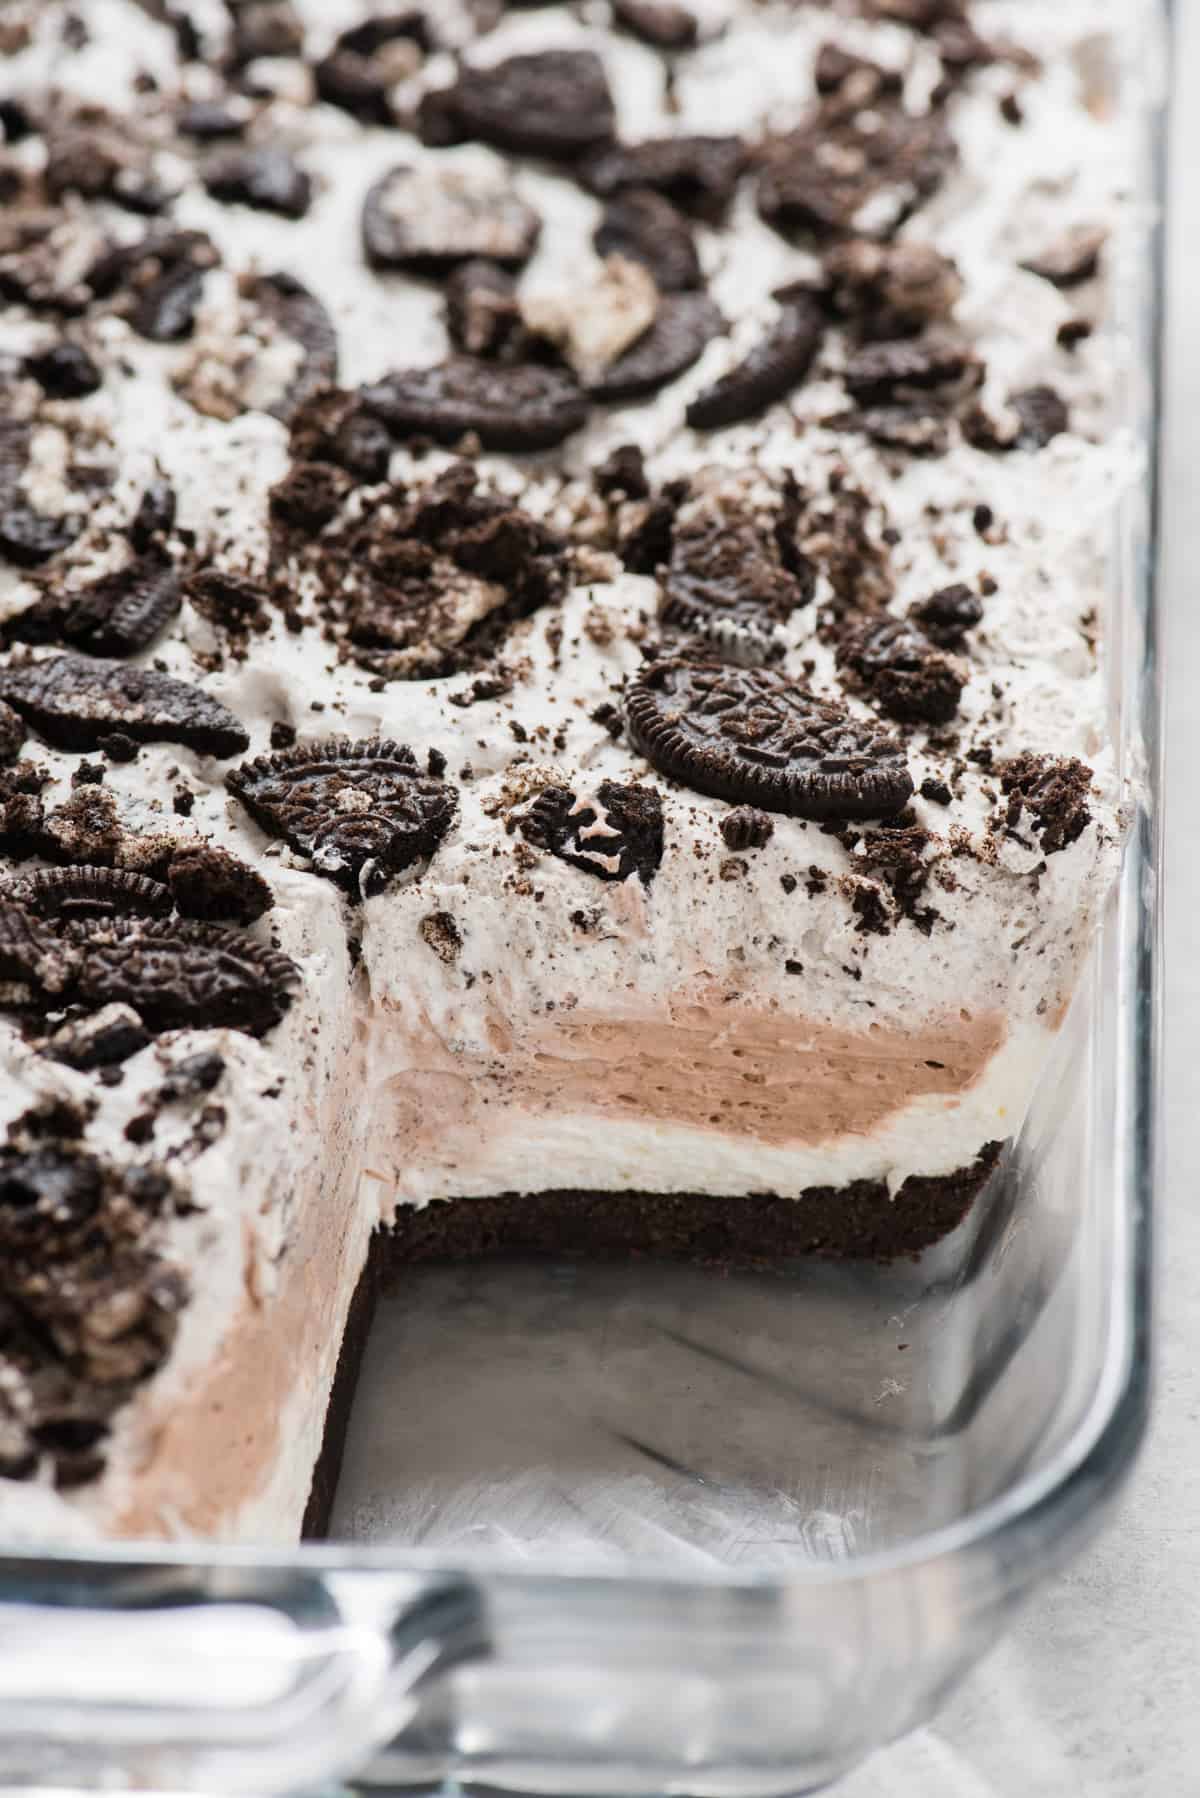 slice of oreo dessert removed from glass 9x13 inch pan